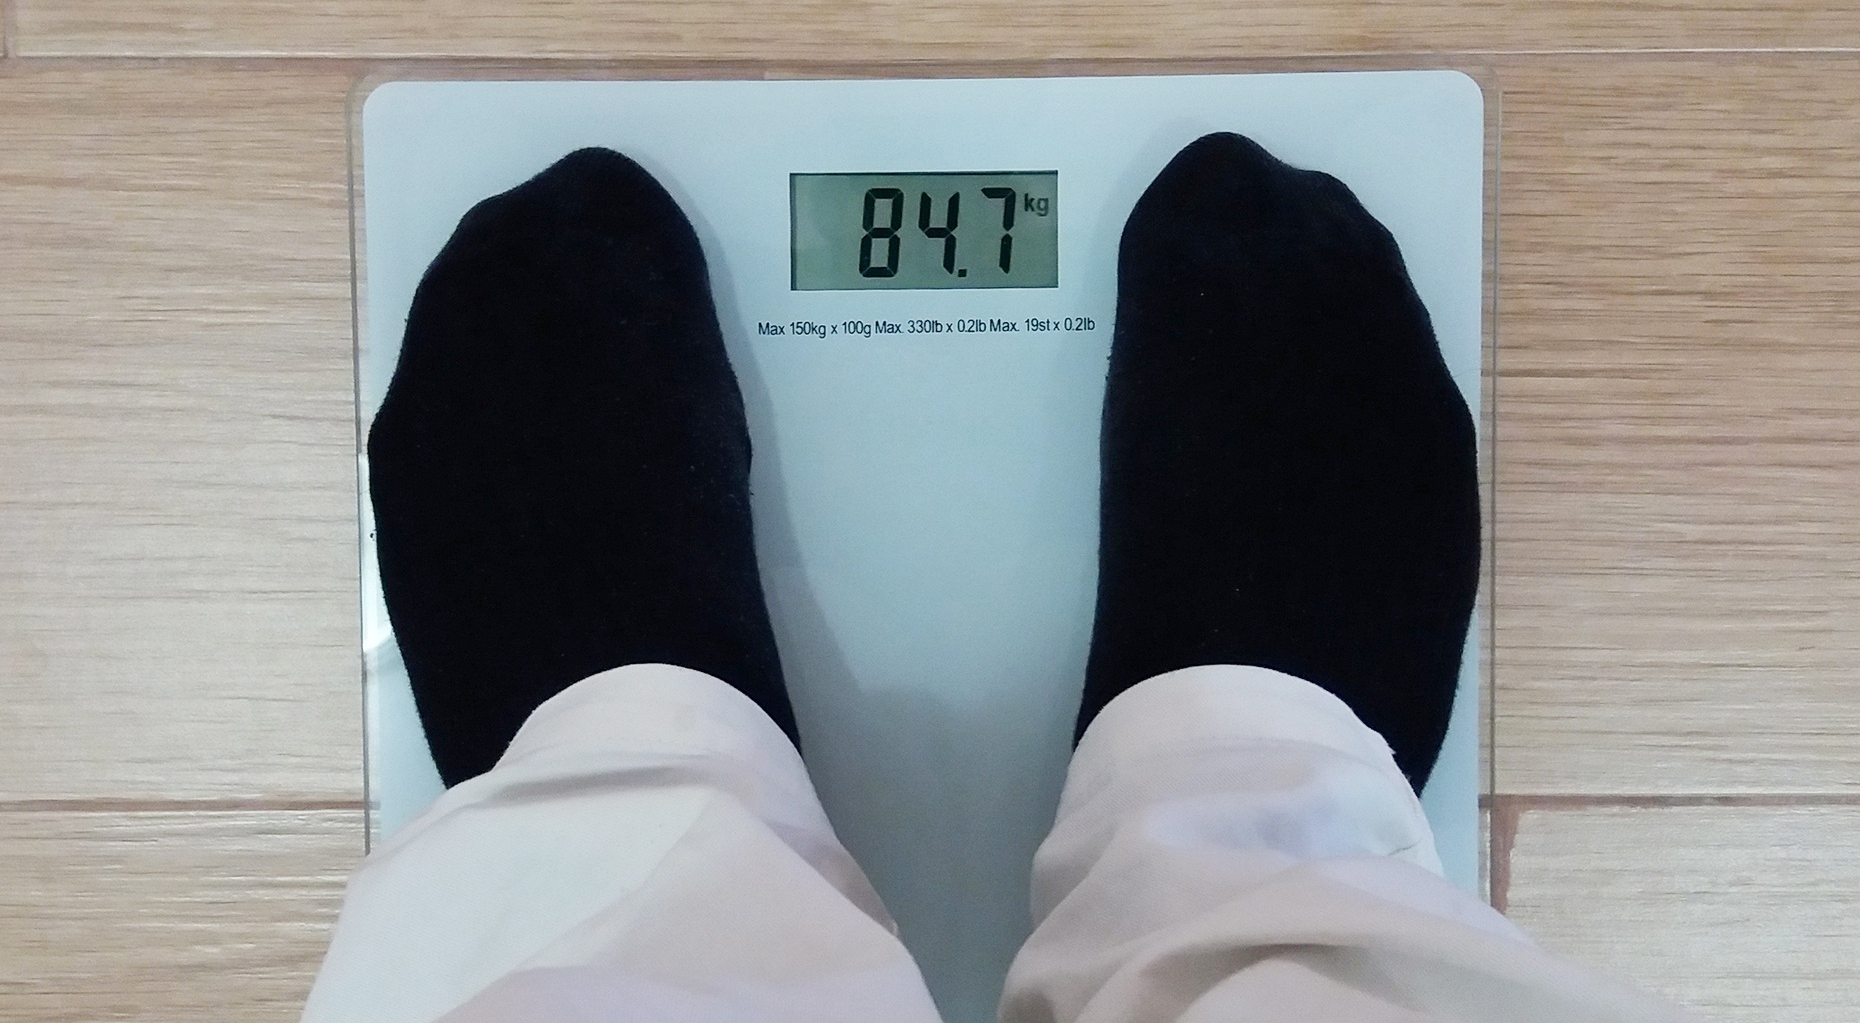 Is there an optimal weight? Overweight is usually determined by the body mass index (BMI).